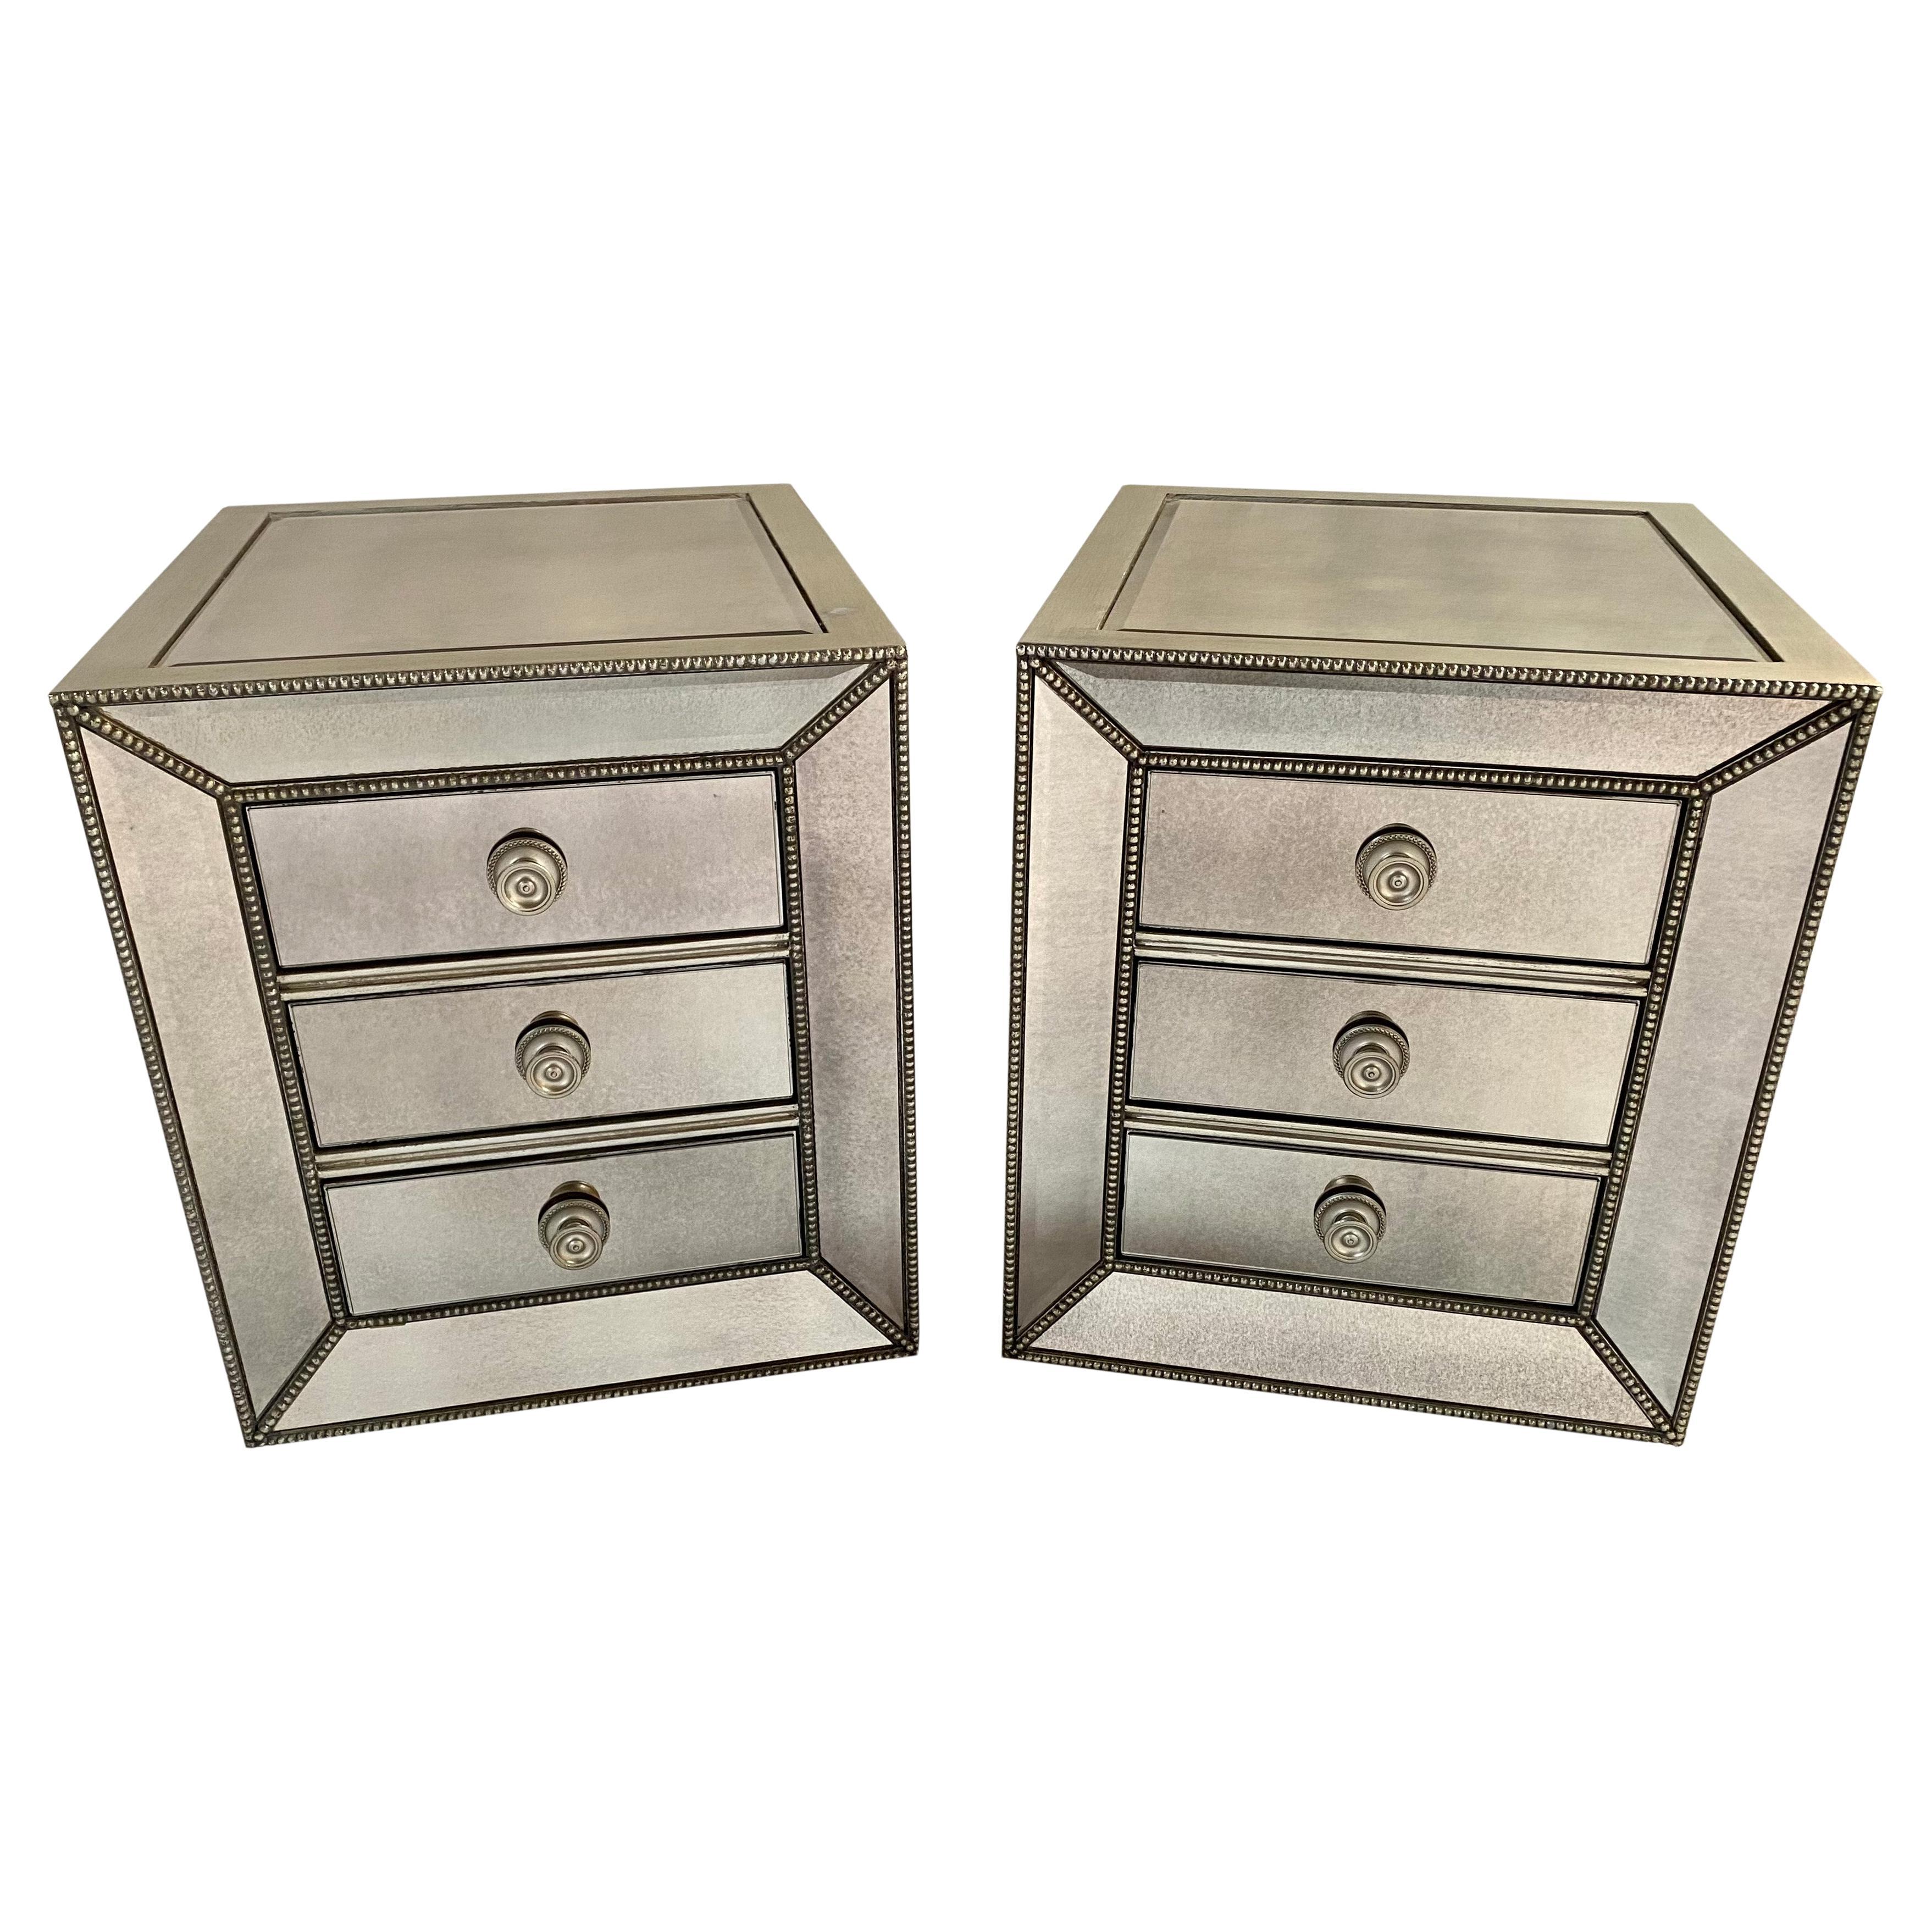 Modern Directoire Style Mirrored Studded 3-Drawer Nightstand, a Pair 